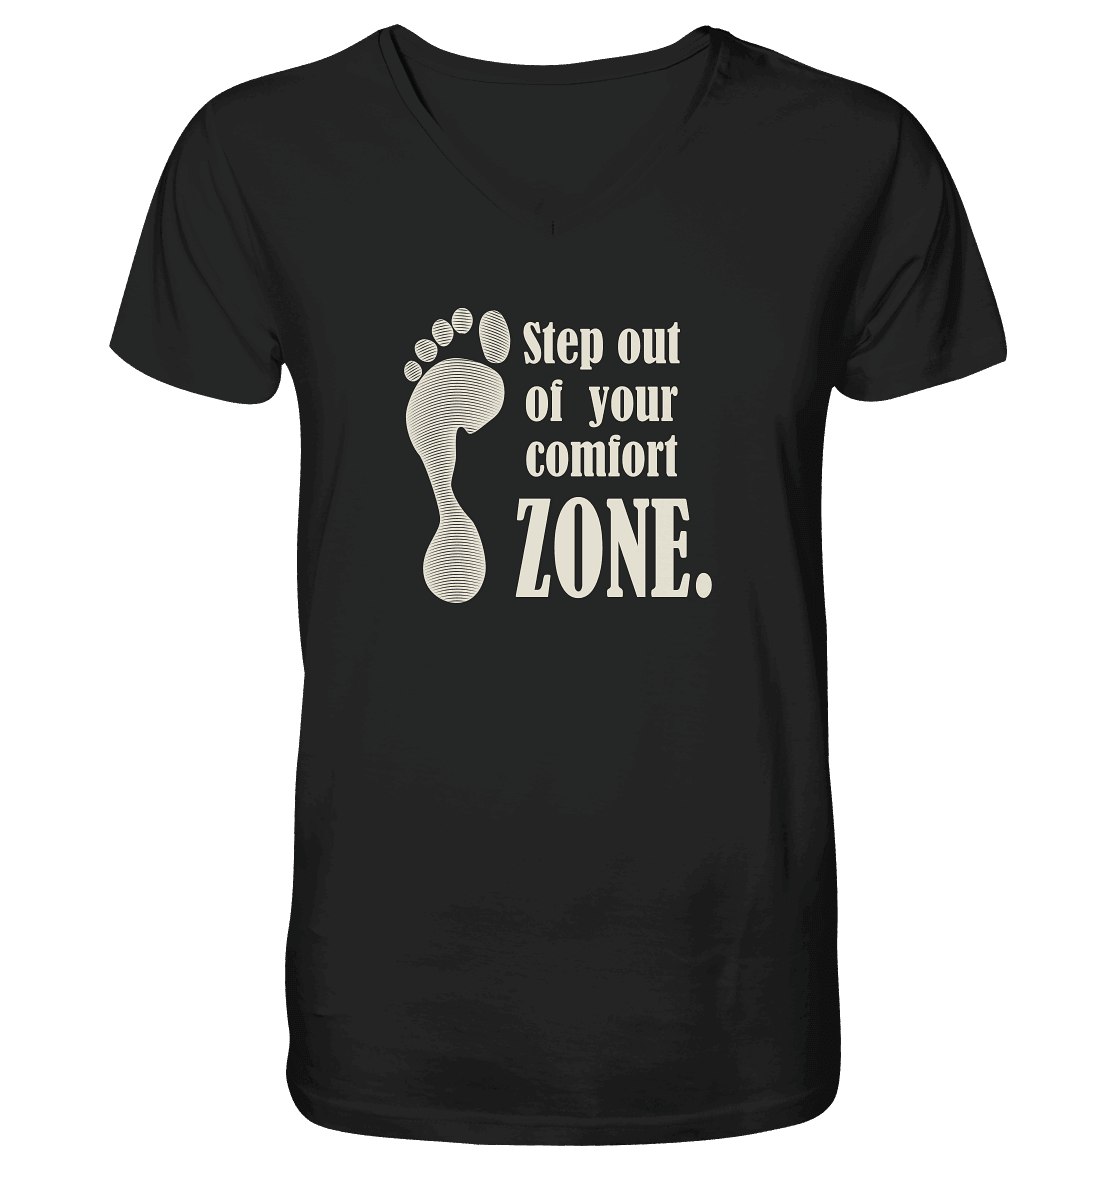 step out of your comfort zone - Mens Organic V-Neck Shirt